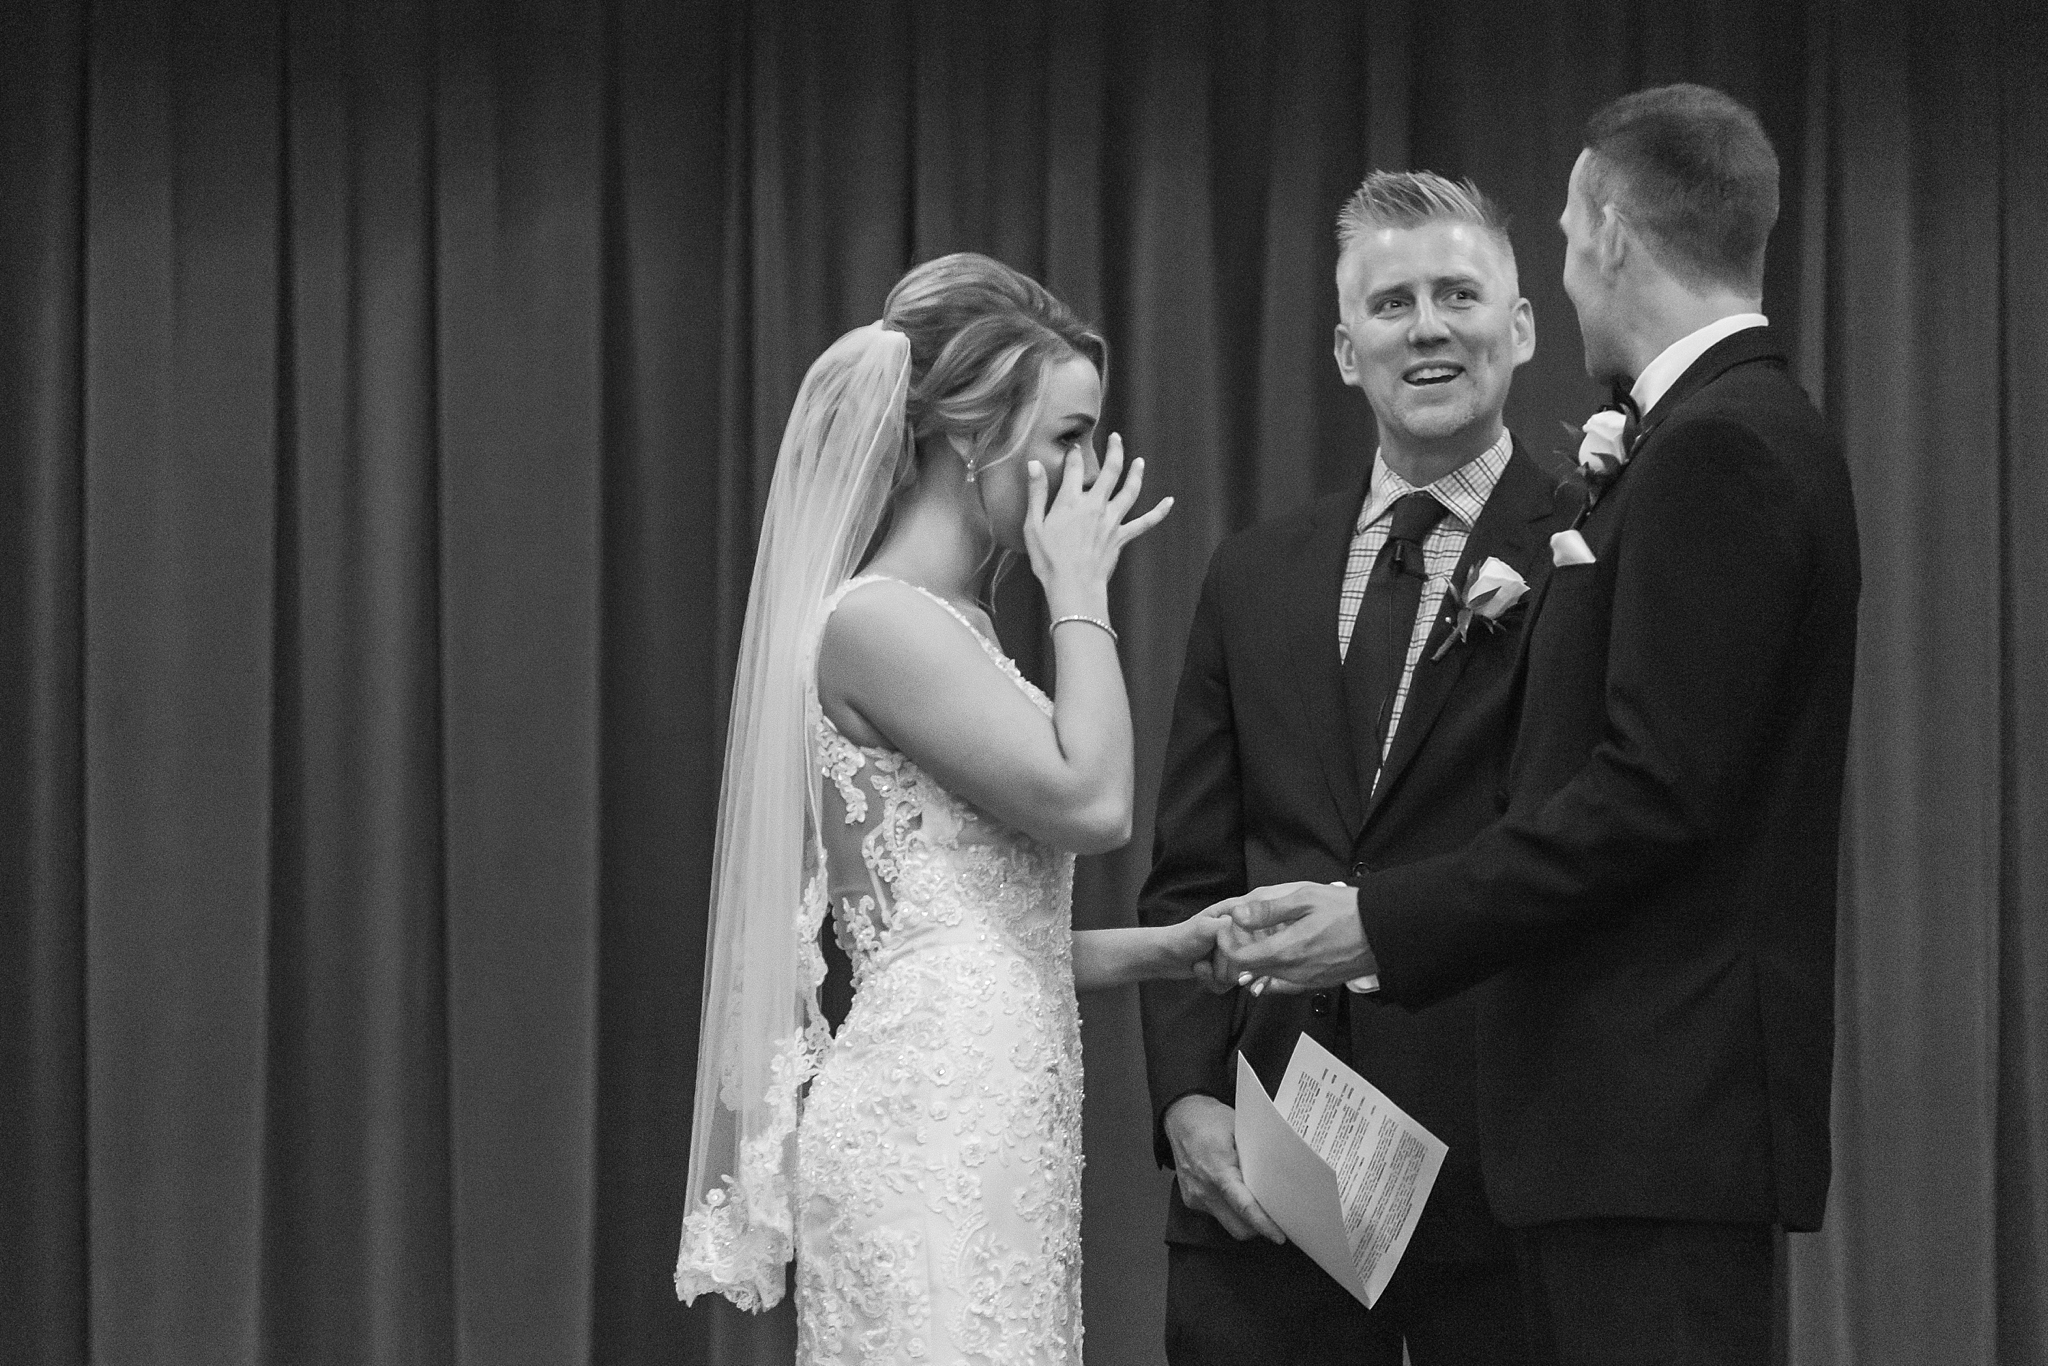 candid-romantic-wedding-photos-at-the-masonic-temple-belle-isle-detroit-institute-of-arts-in-detroit-michigan-by-courtney-carolyn-photography_0077.jpg